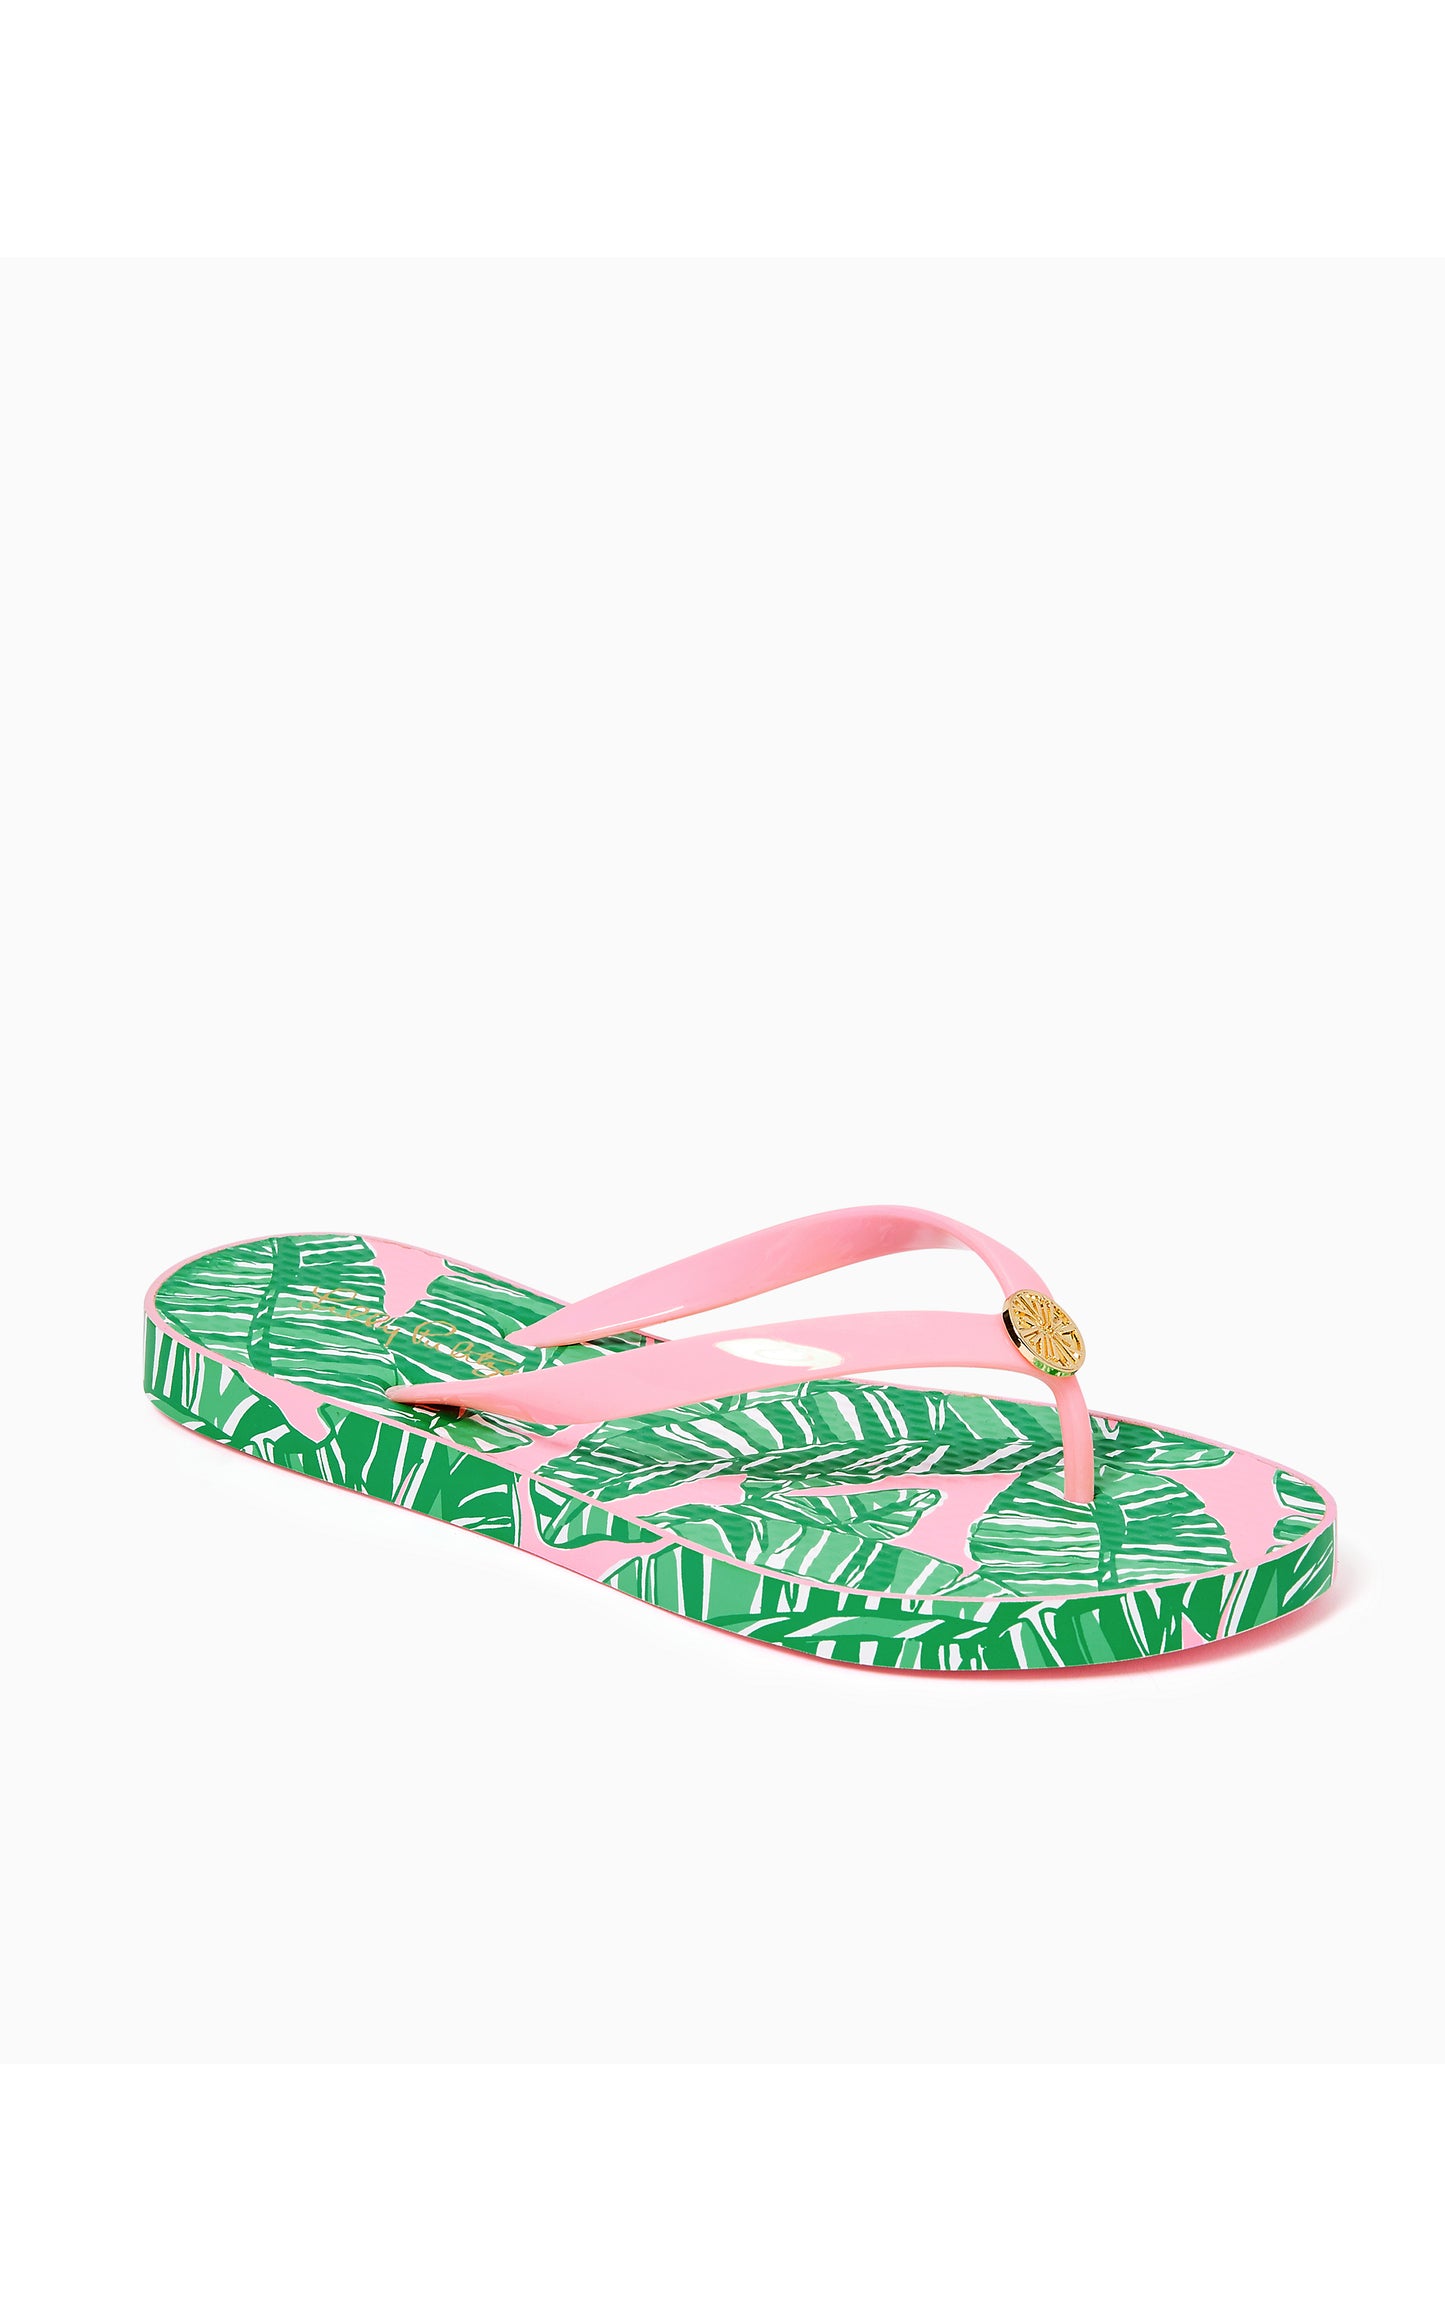 Pool Flip Flop in Conch Shell Pink Lets Go Bananas Shoe